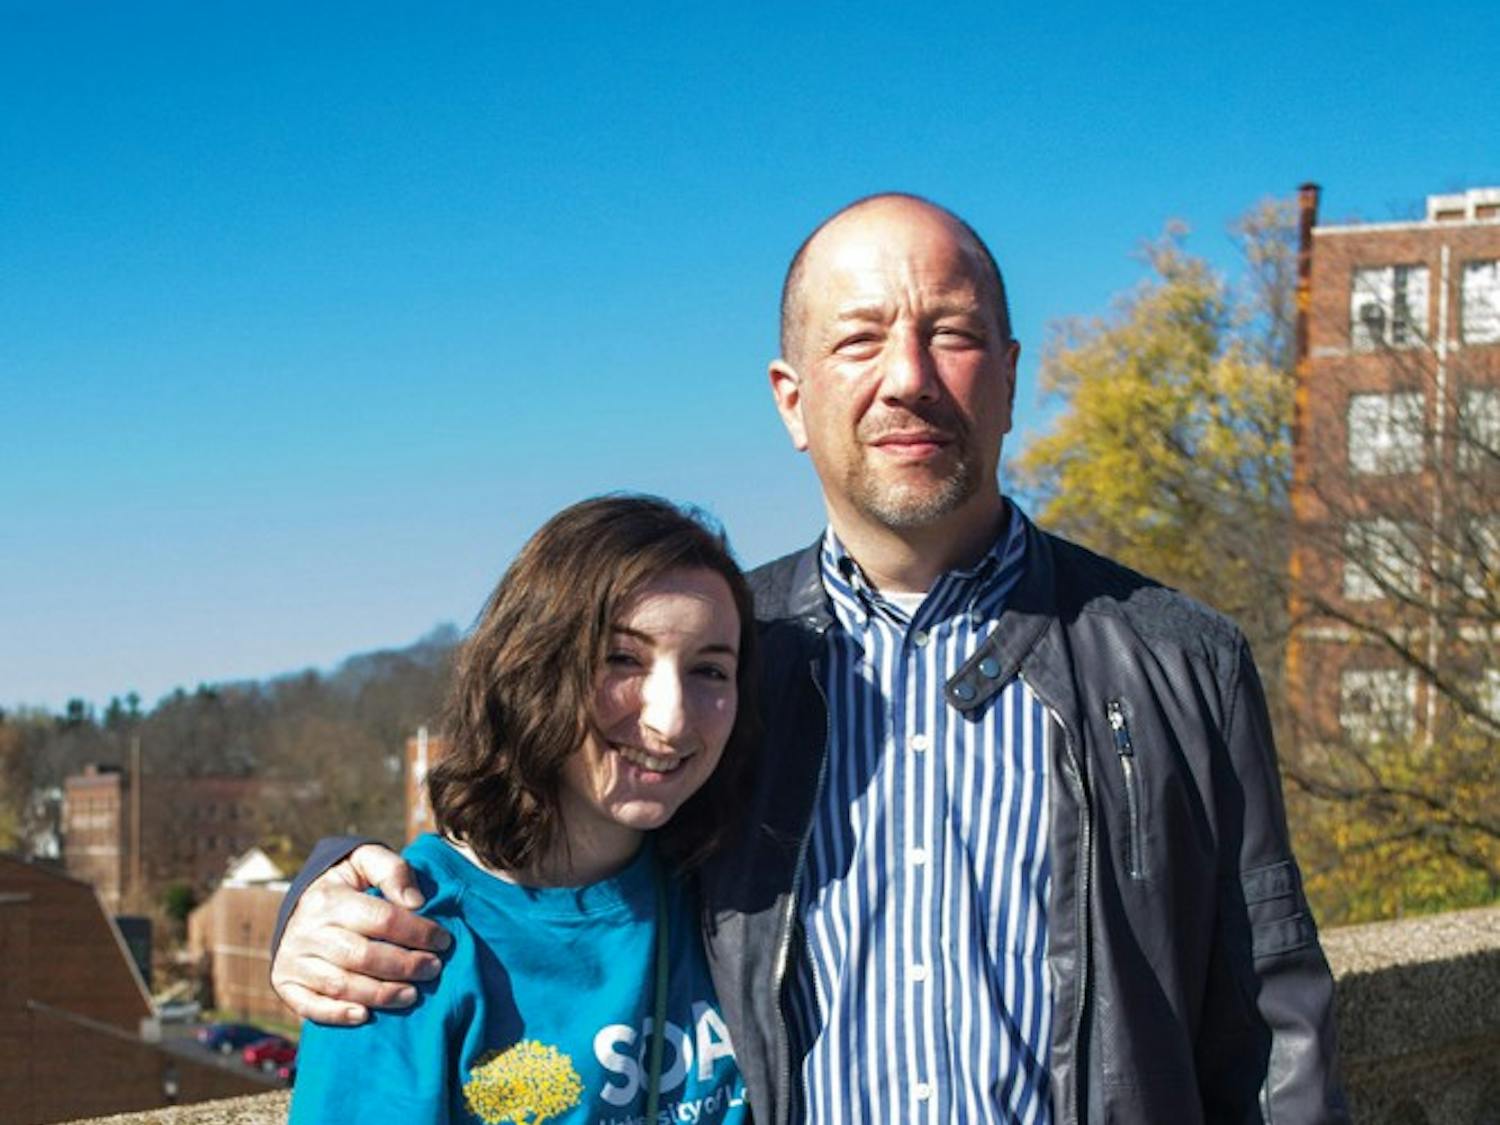 Emma Schultz, a freshman studying media and social change, and her dad, Mark Schultz  